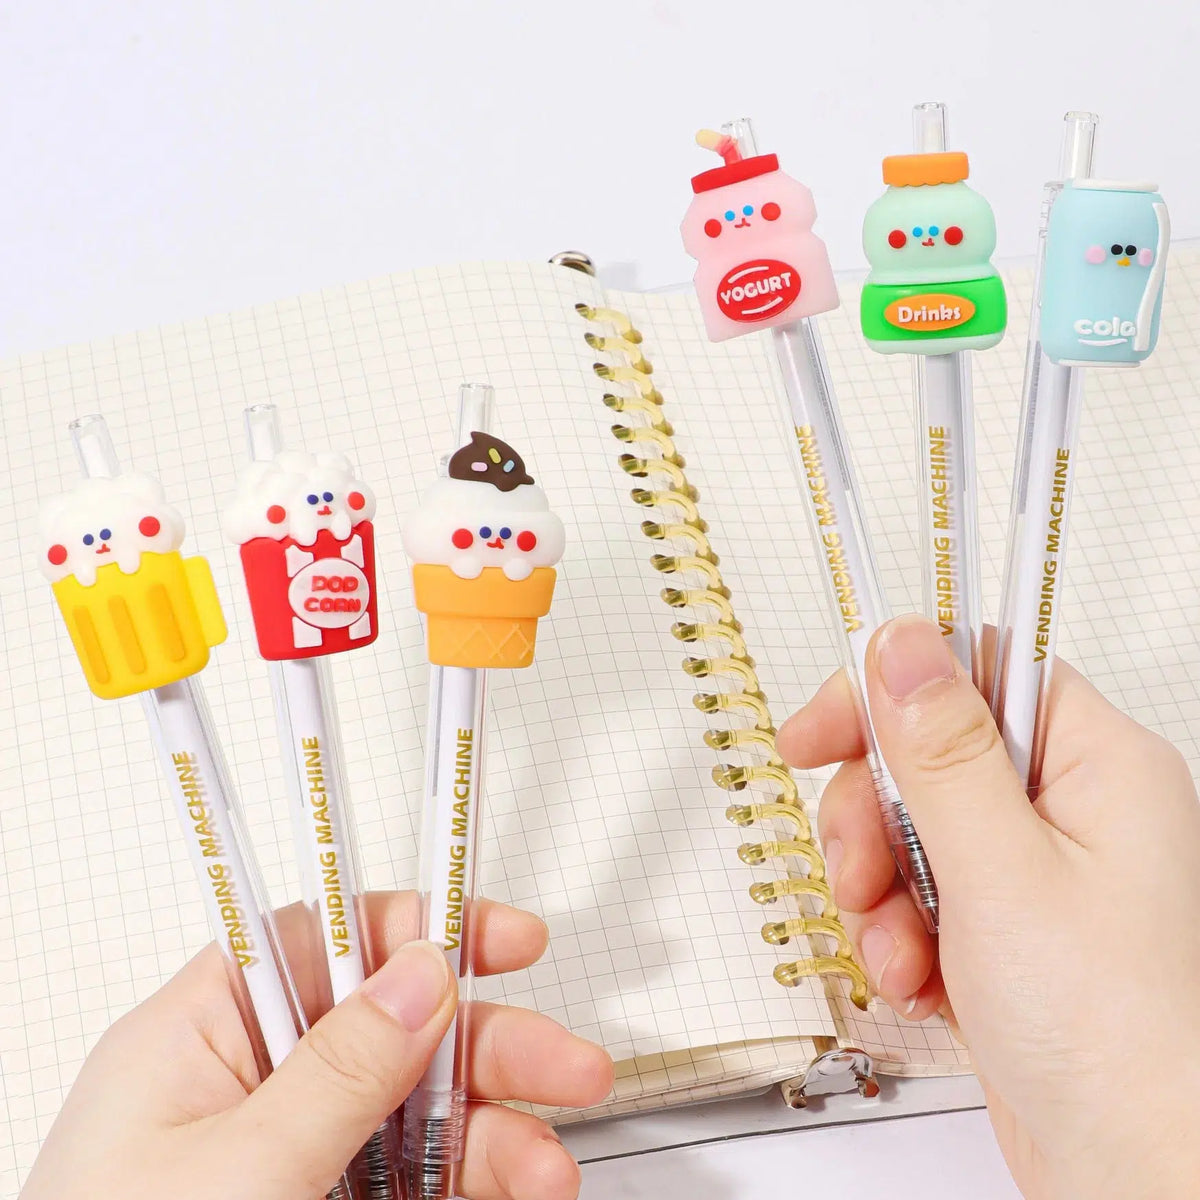 Front up close view of a person&#39;s hands holding the assorted styles of the 24-Hour Snack Shop Retractable Pen including the beer, drink, yogurt, ice cream cone, pop corn and cola over a spiral notebook.